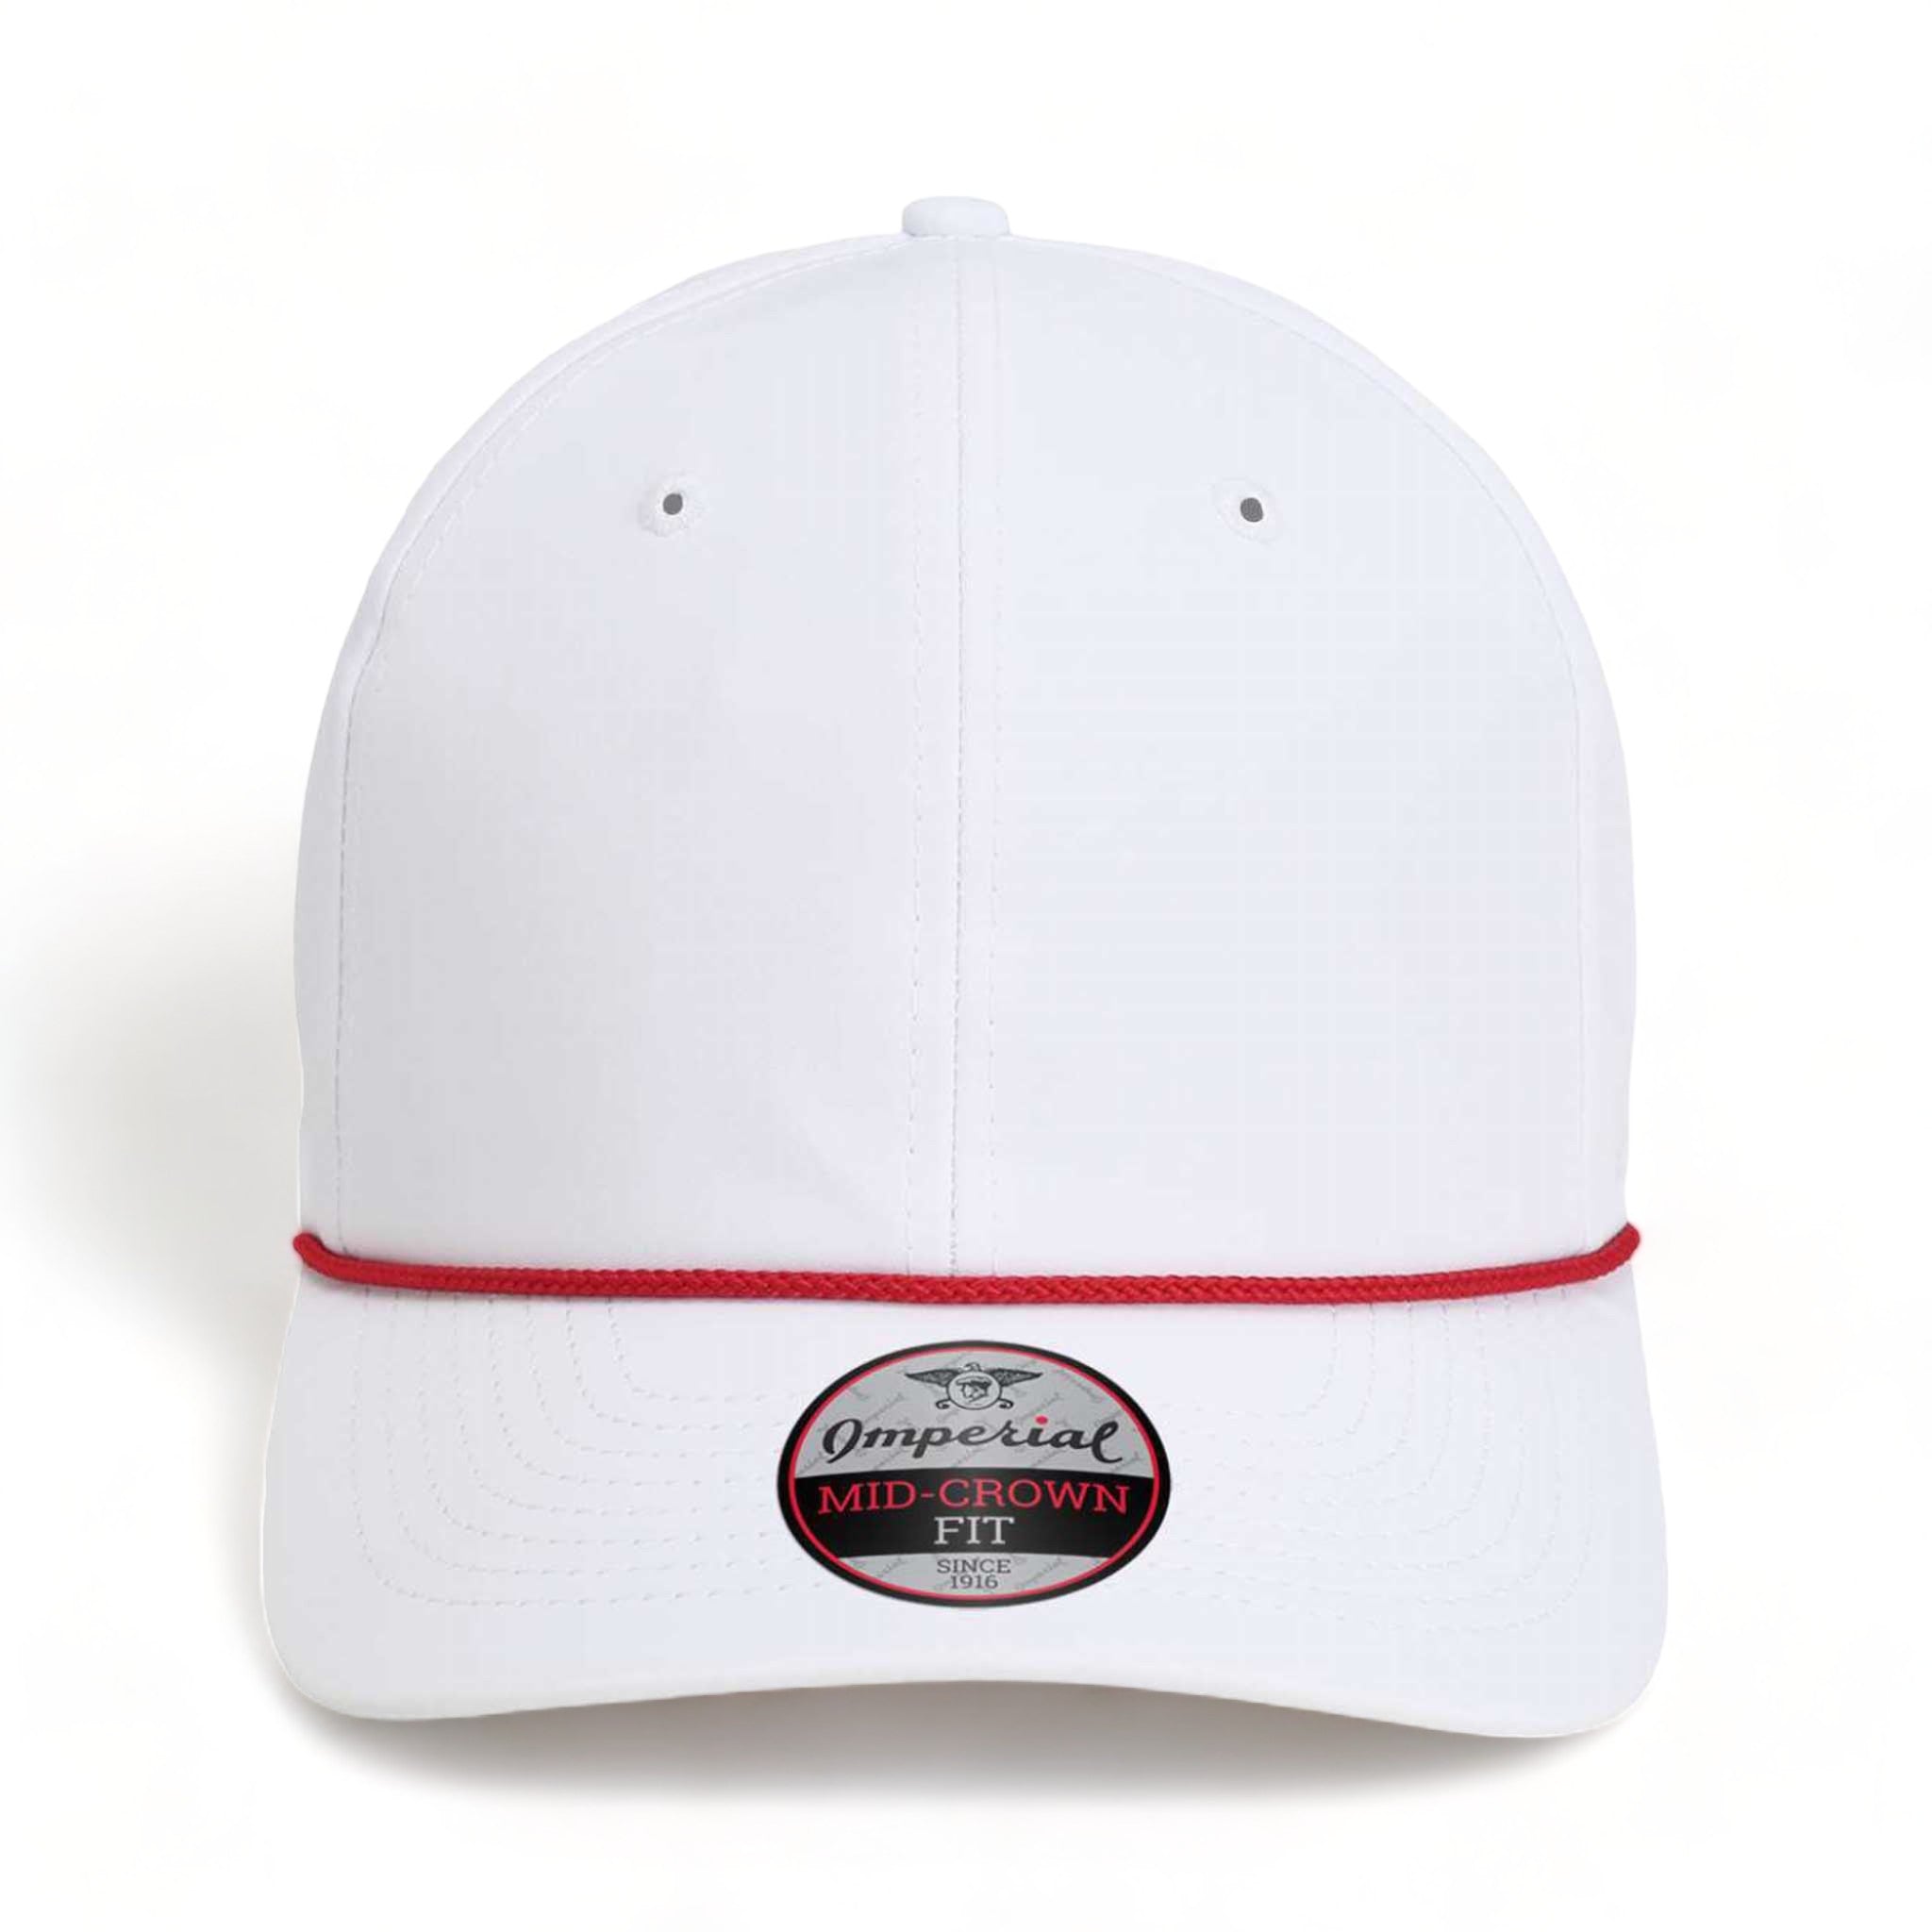 Front view of Imperial 7054 custom hat in white and red